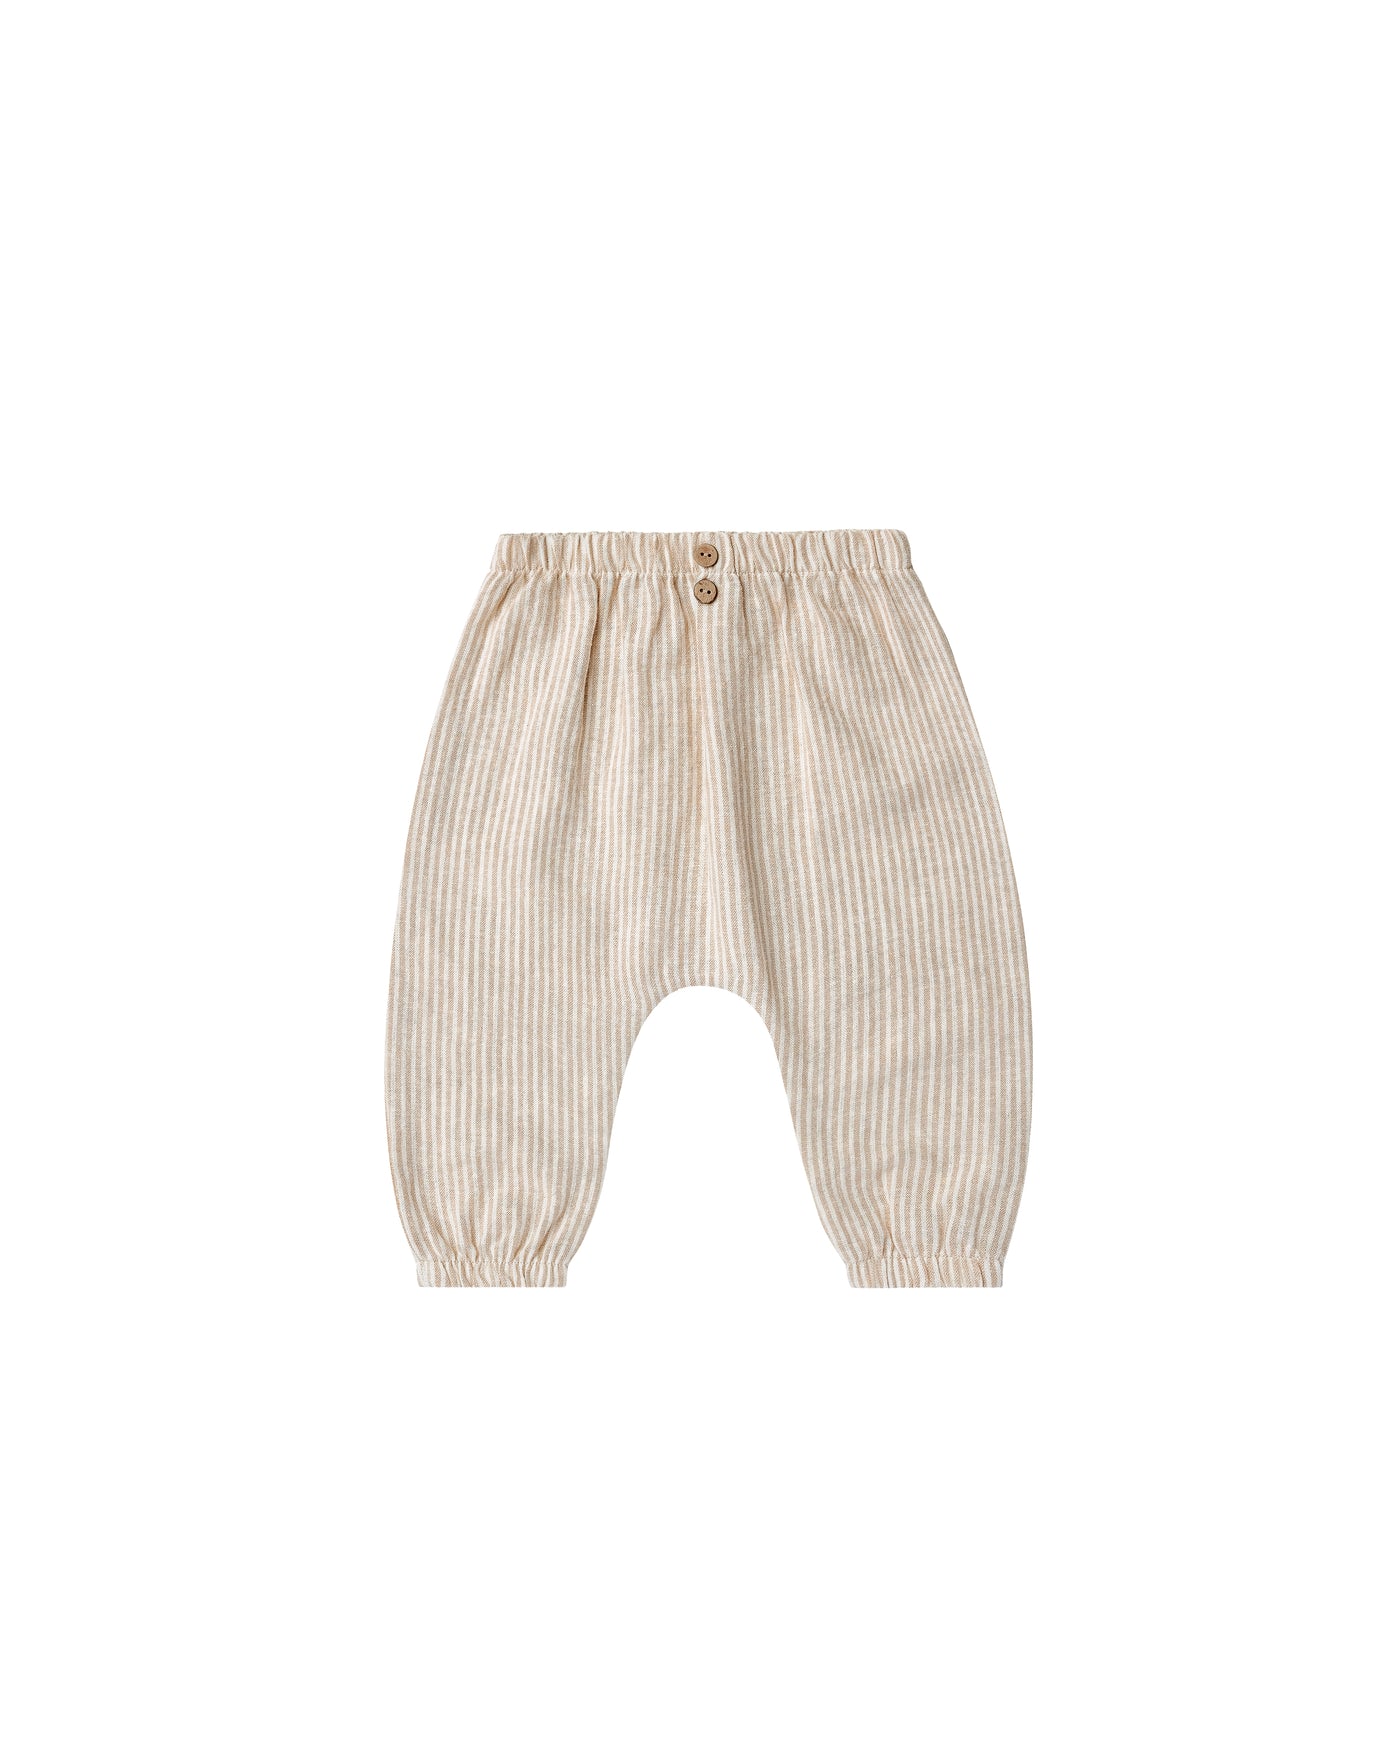 Woven Baby Pant || Sand Stripe